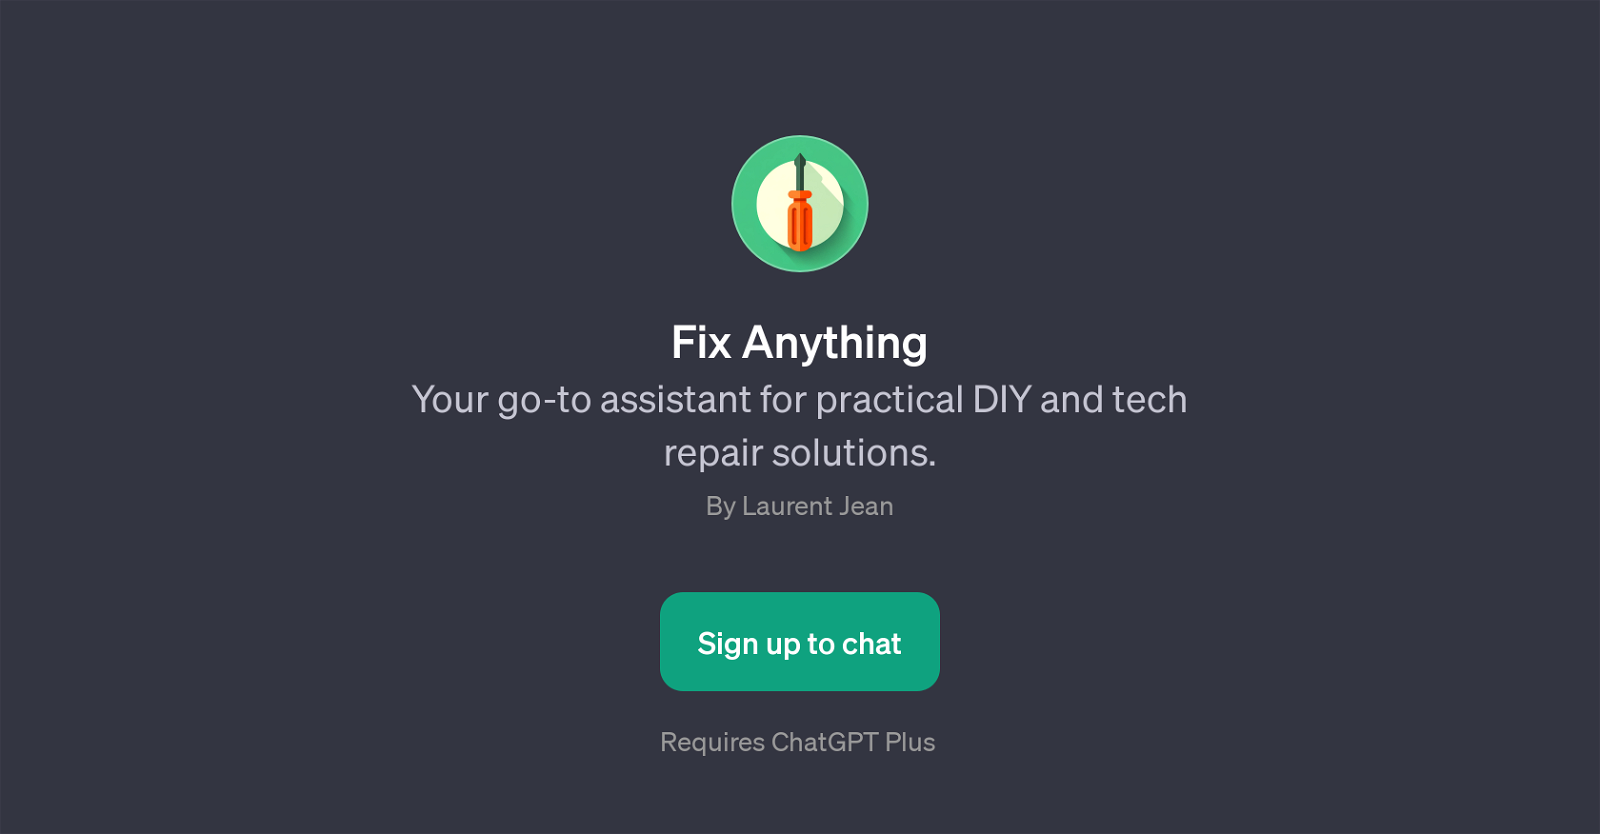 Fix Anything website